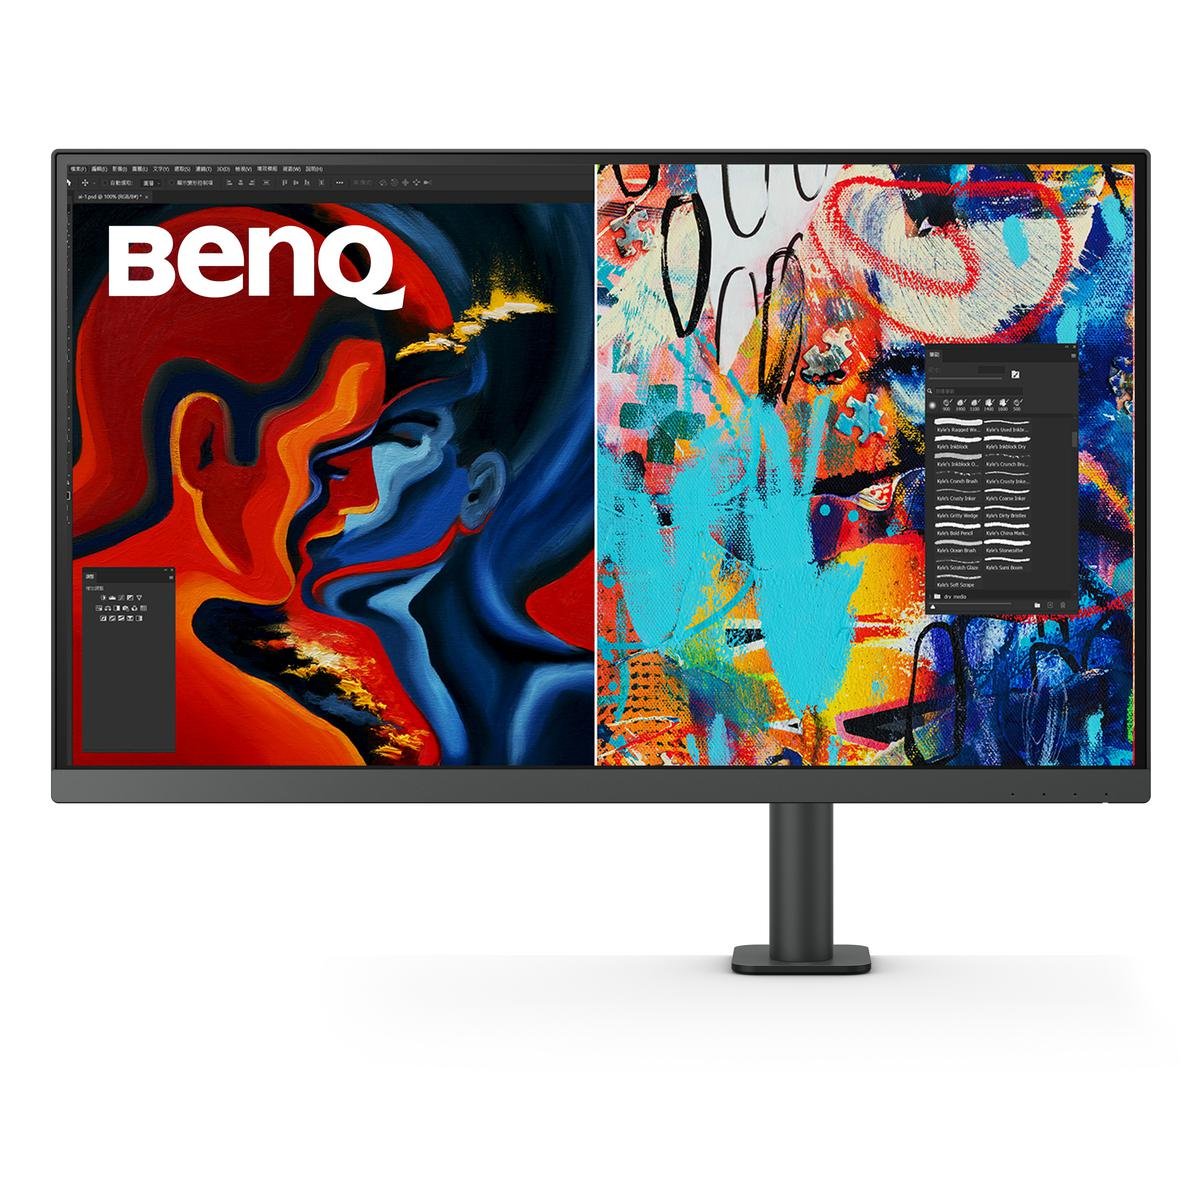 BenQ Launches New PD UA Series Monitors for Pro Designers with AQ Color Technology